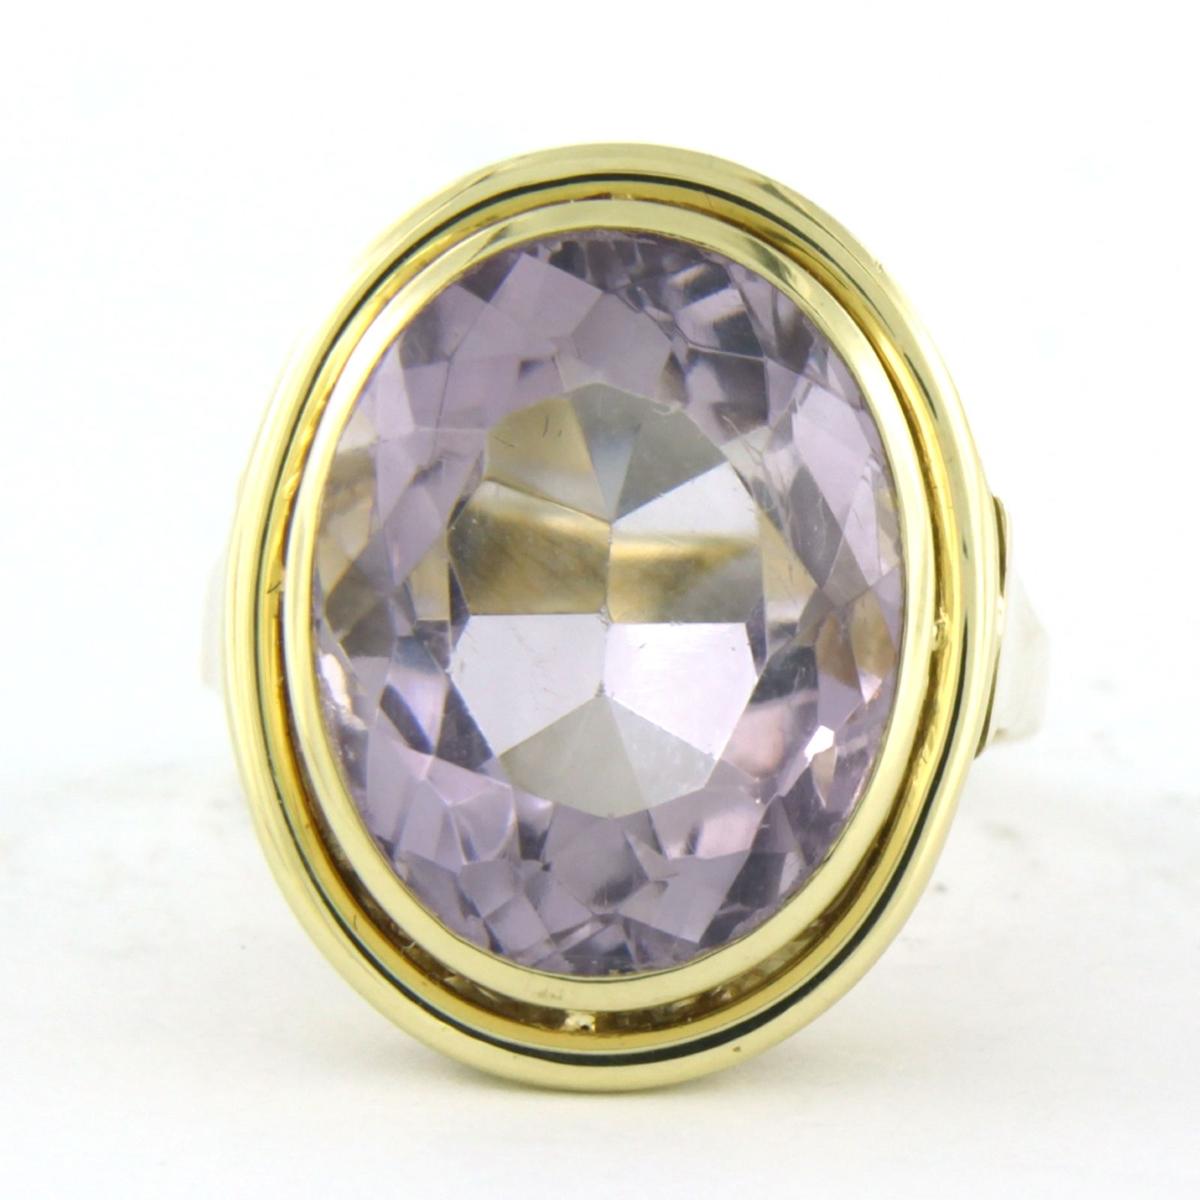 14k yellow gold ring set with oval cut amethyst - ring size  U.S. 6.75 - EU. 17(53)

detailed description:

The front of the ring is 2.0 cm wide

ring size U.S. 6.75 - EU. 17(53). The ring can be enlarged or reduced a few sizes at cost price.